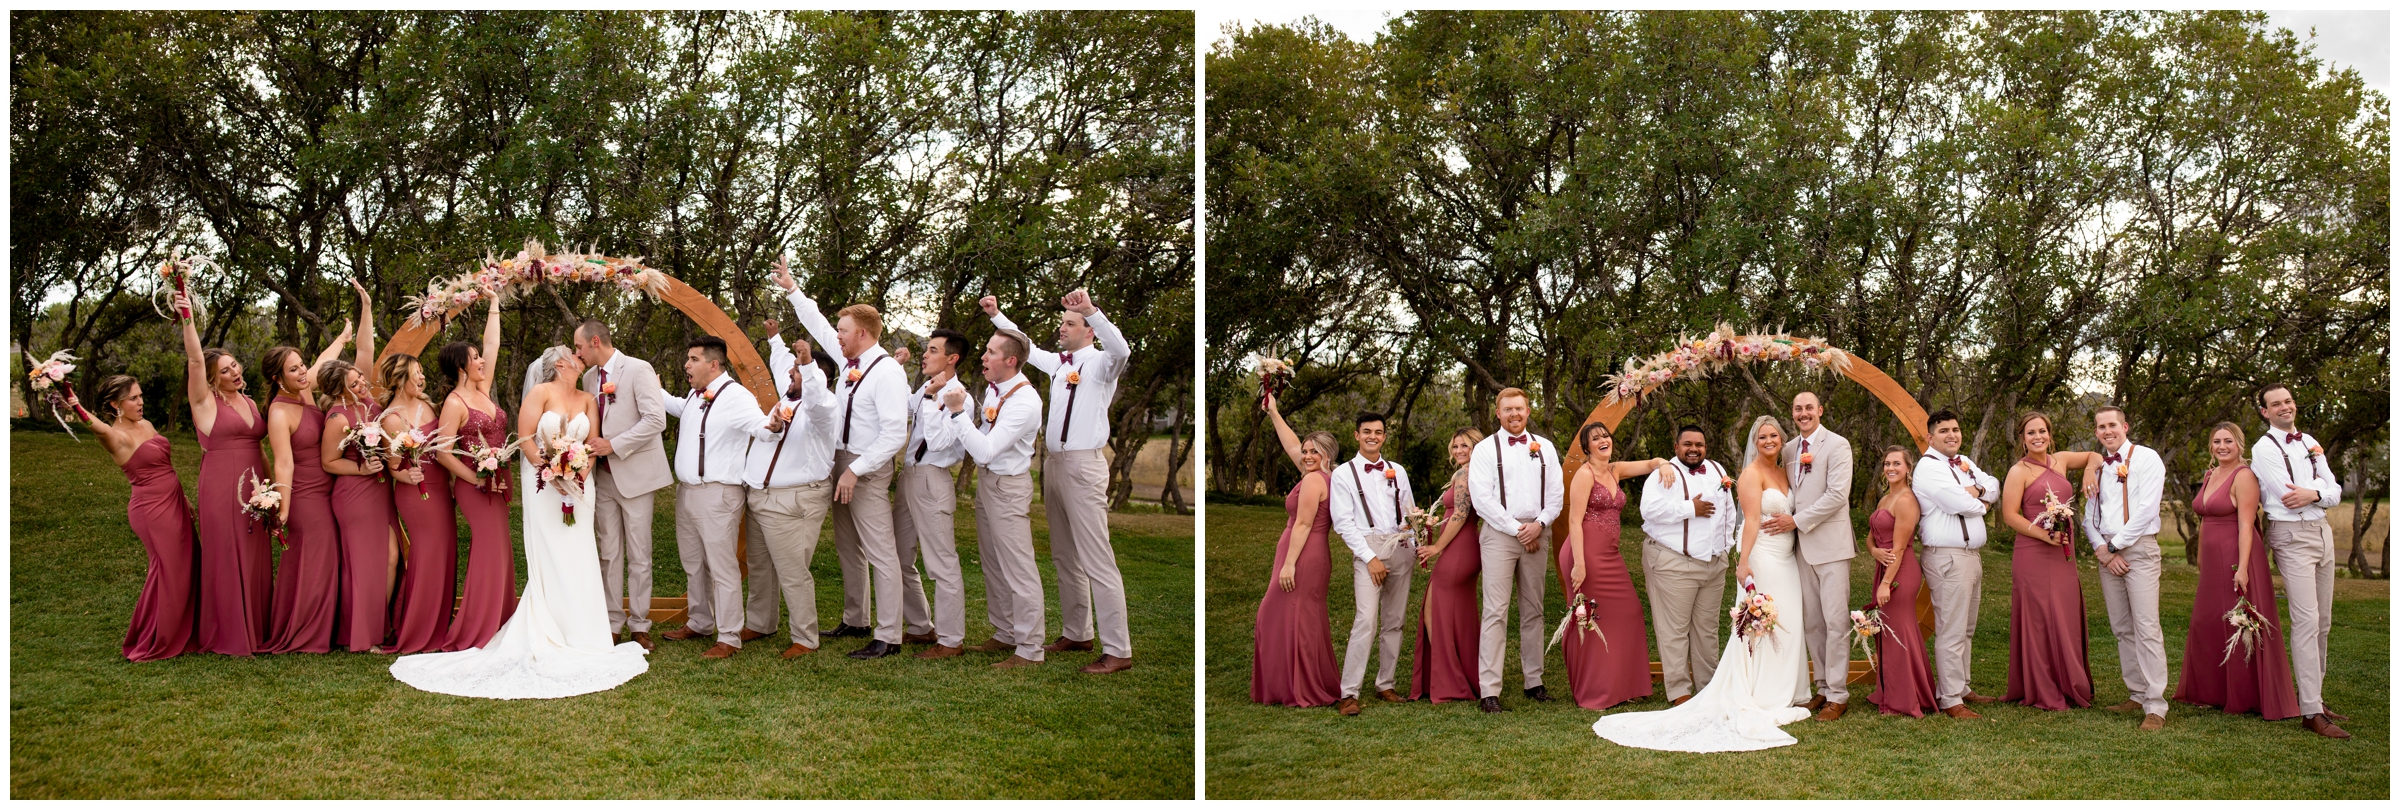 wedding party in dusty rose and khaki at Castle Rock Colorado summer wedding 